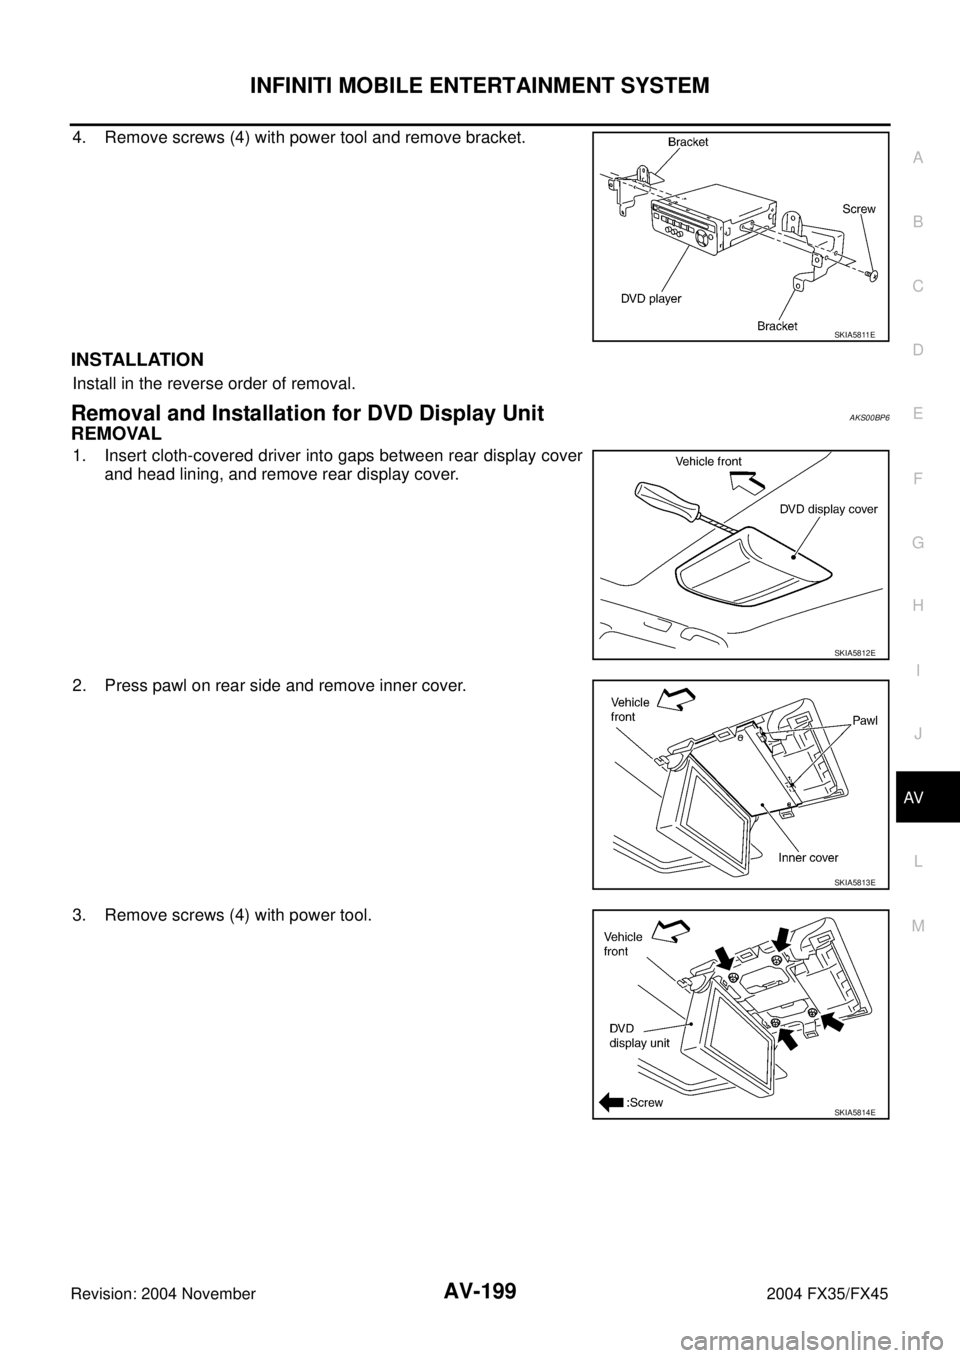 INFINITI FX35 2004  Service Manual INFINITI MOBILE ENTERTAINMENT SYSTEM
AV-199
C
D
E
F
G
H
I
J
L
MA
B
AV
Revision: 2004 November 2004 FX35/FX45
4. Remove screws (4) with power tool and remove bracket.
INSTALLATION
Install in the revers